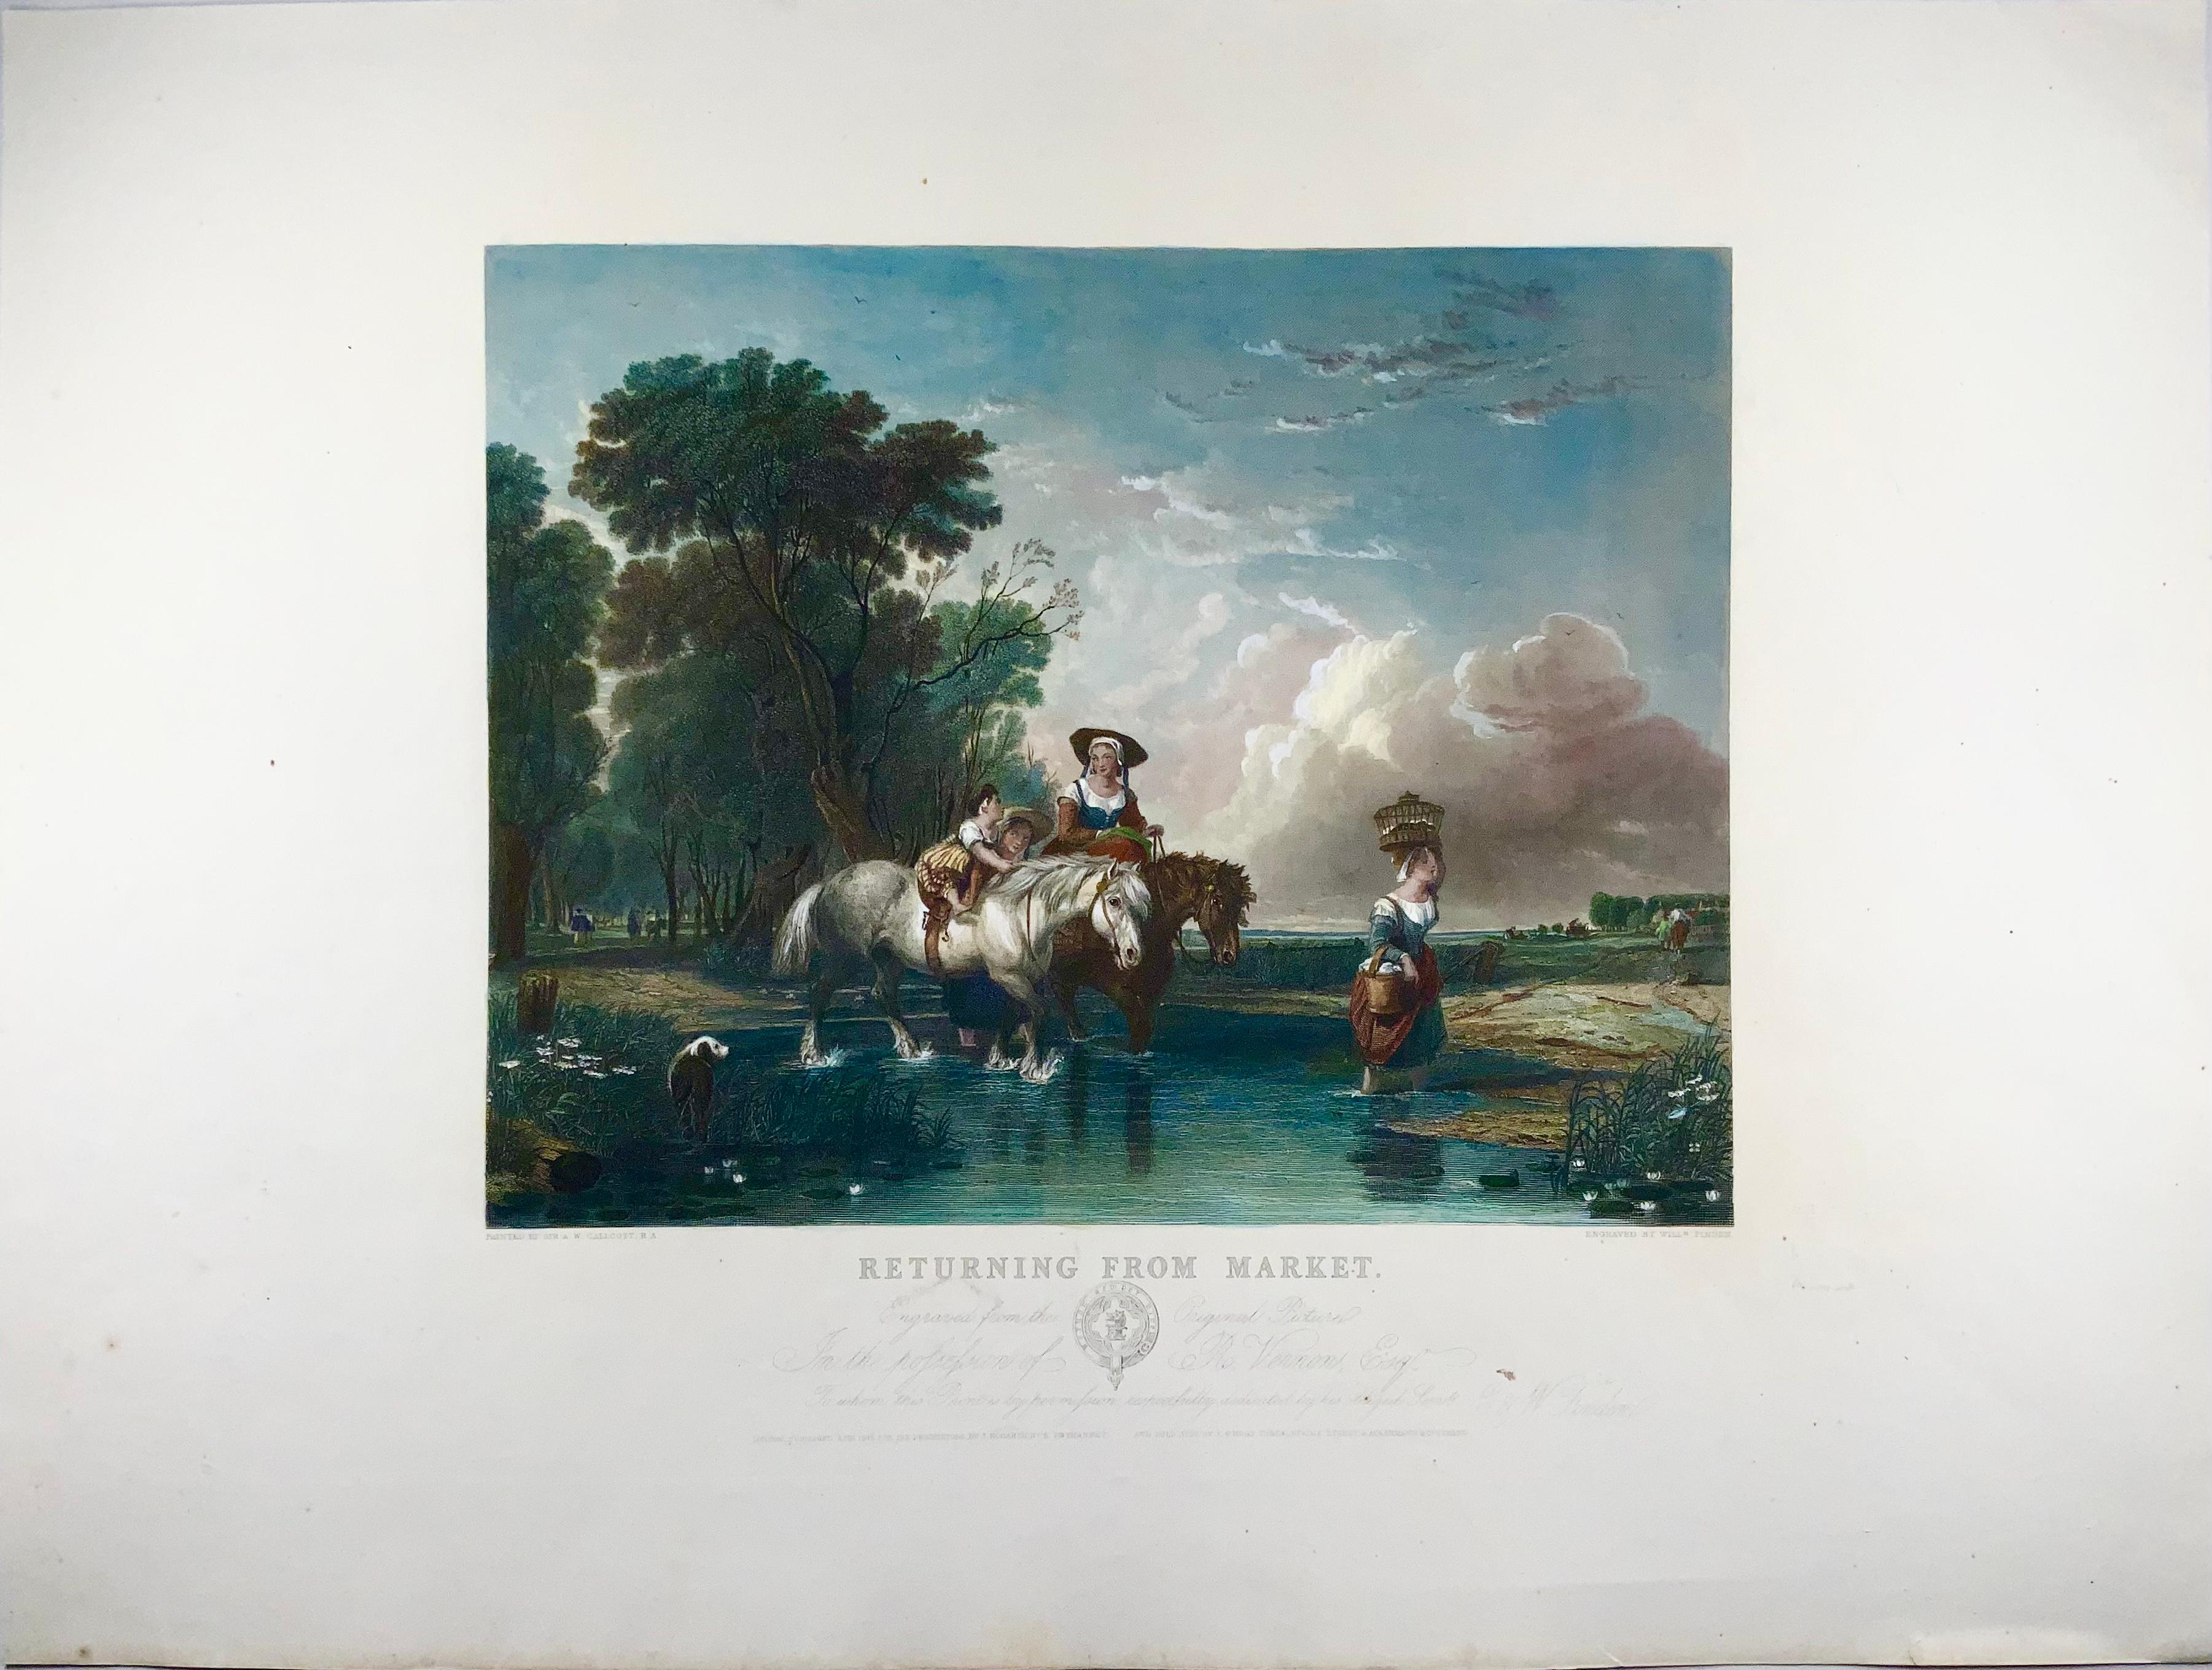 Returning from Market

Measures: 400 x 550 mm. 

An original engraving after by Sir A. W. Callcott, R.A, and engraved by William Finden.

Colour printed with additional hand colour. 

Published in London, April 1845, by J. Hogarth, 5